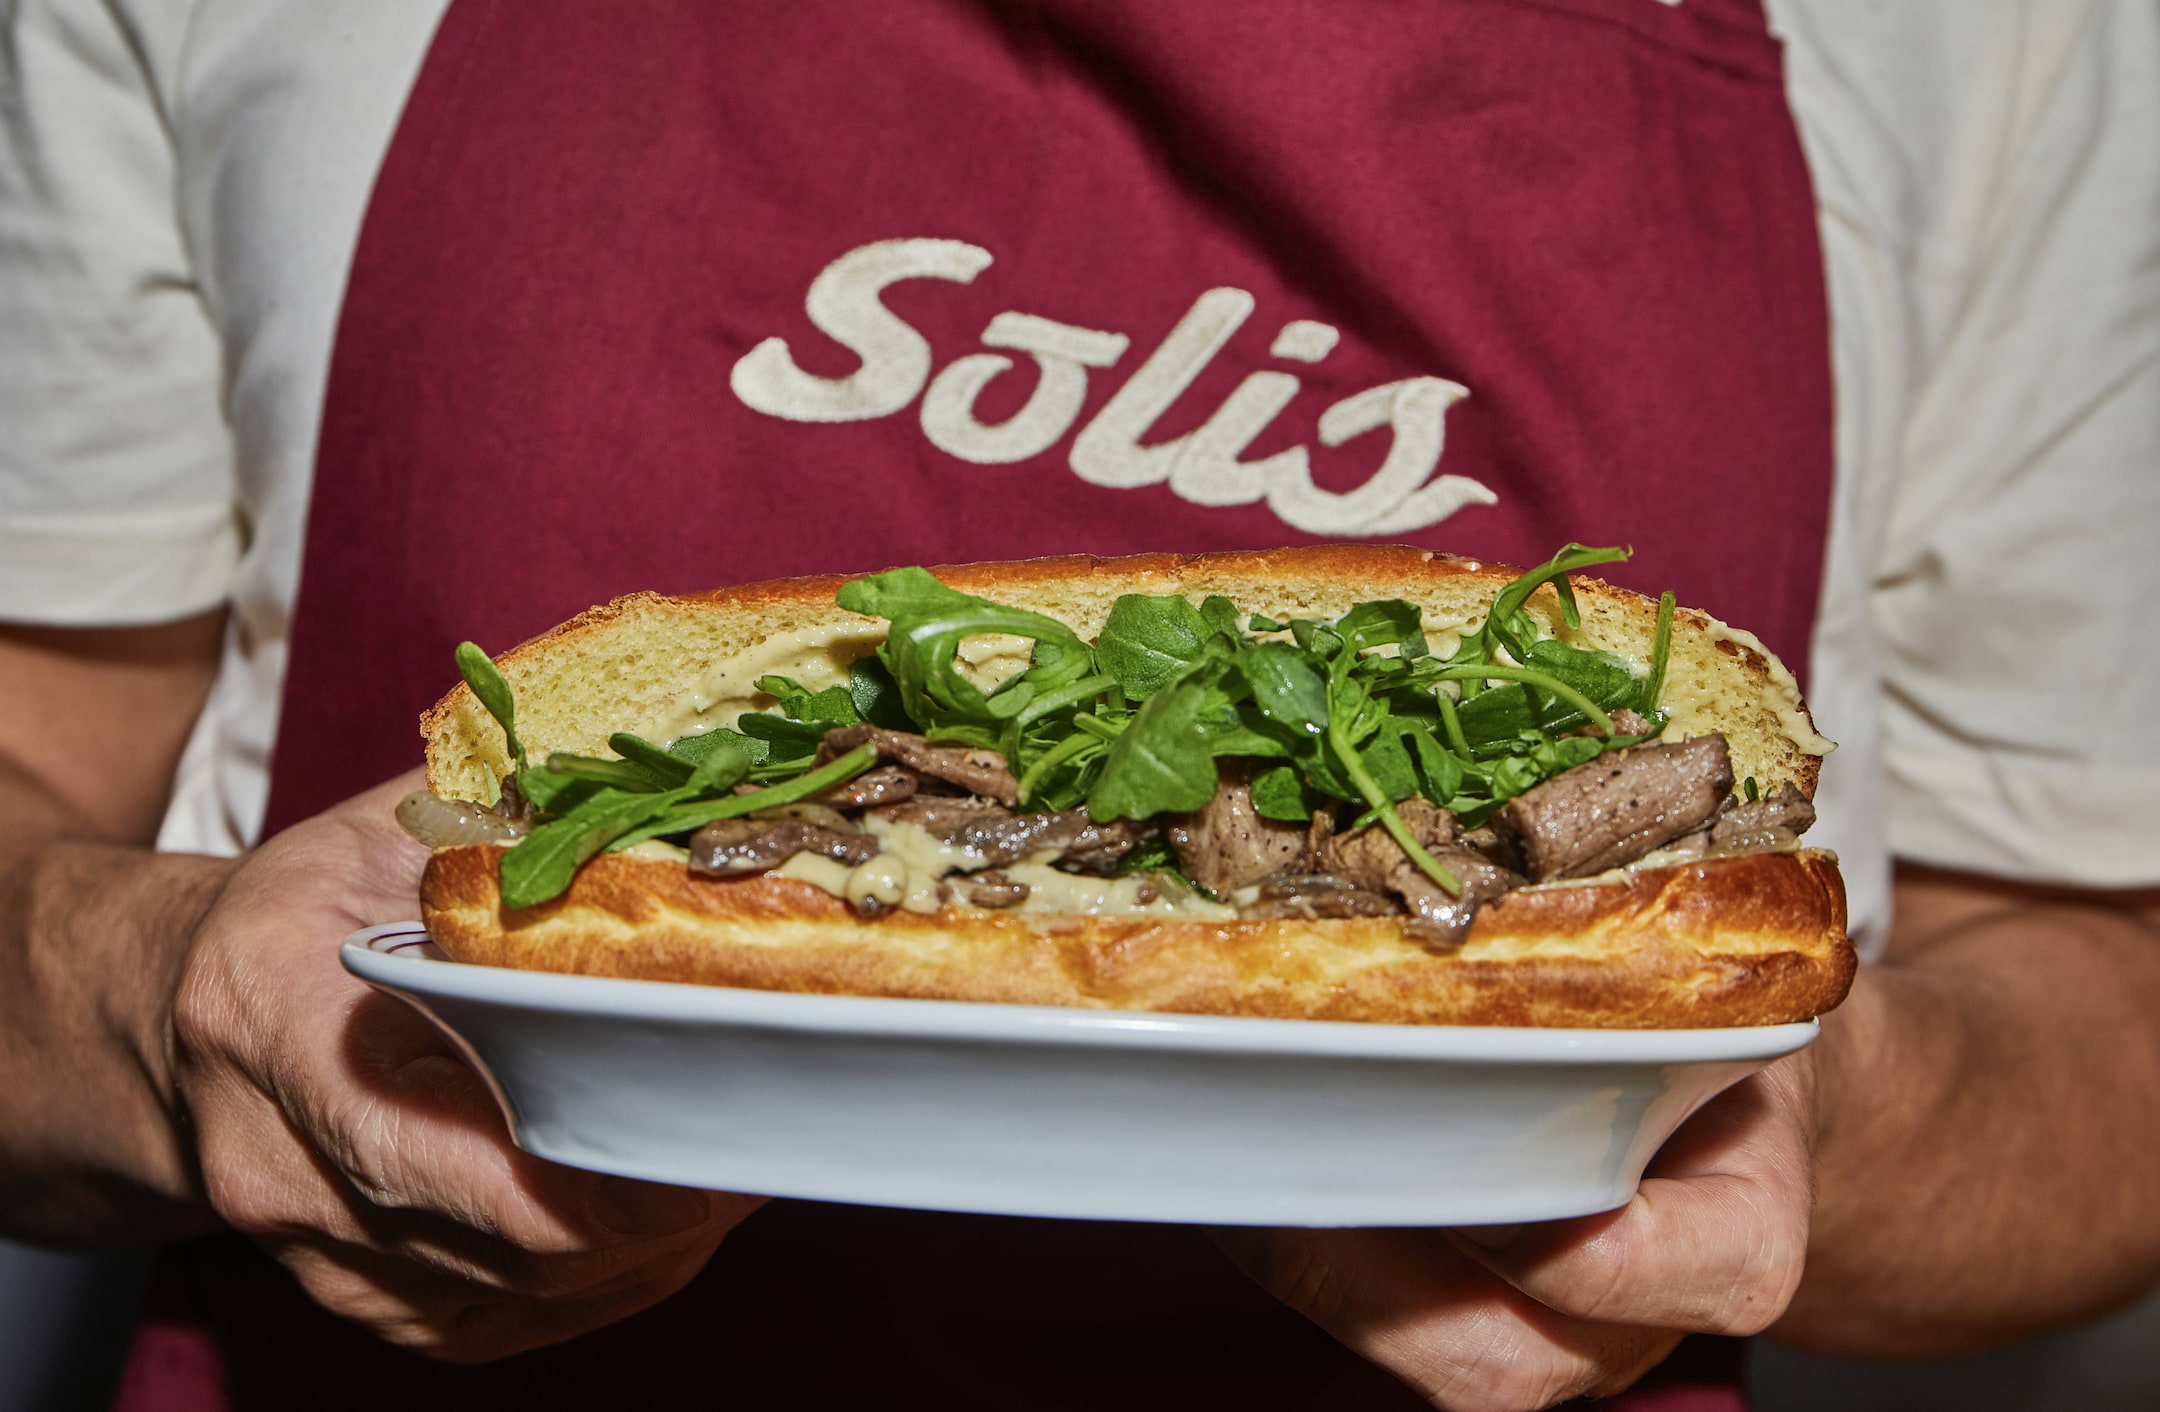 Solis, from the duo behind TĀ TĀ Eatery, opening this October in Arcade Battersea